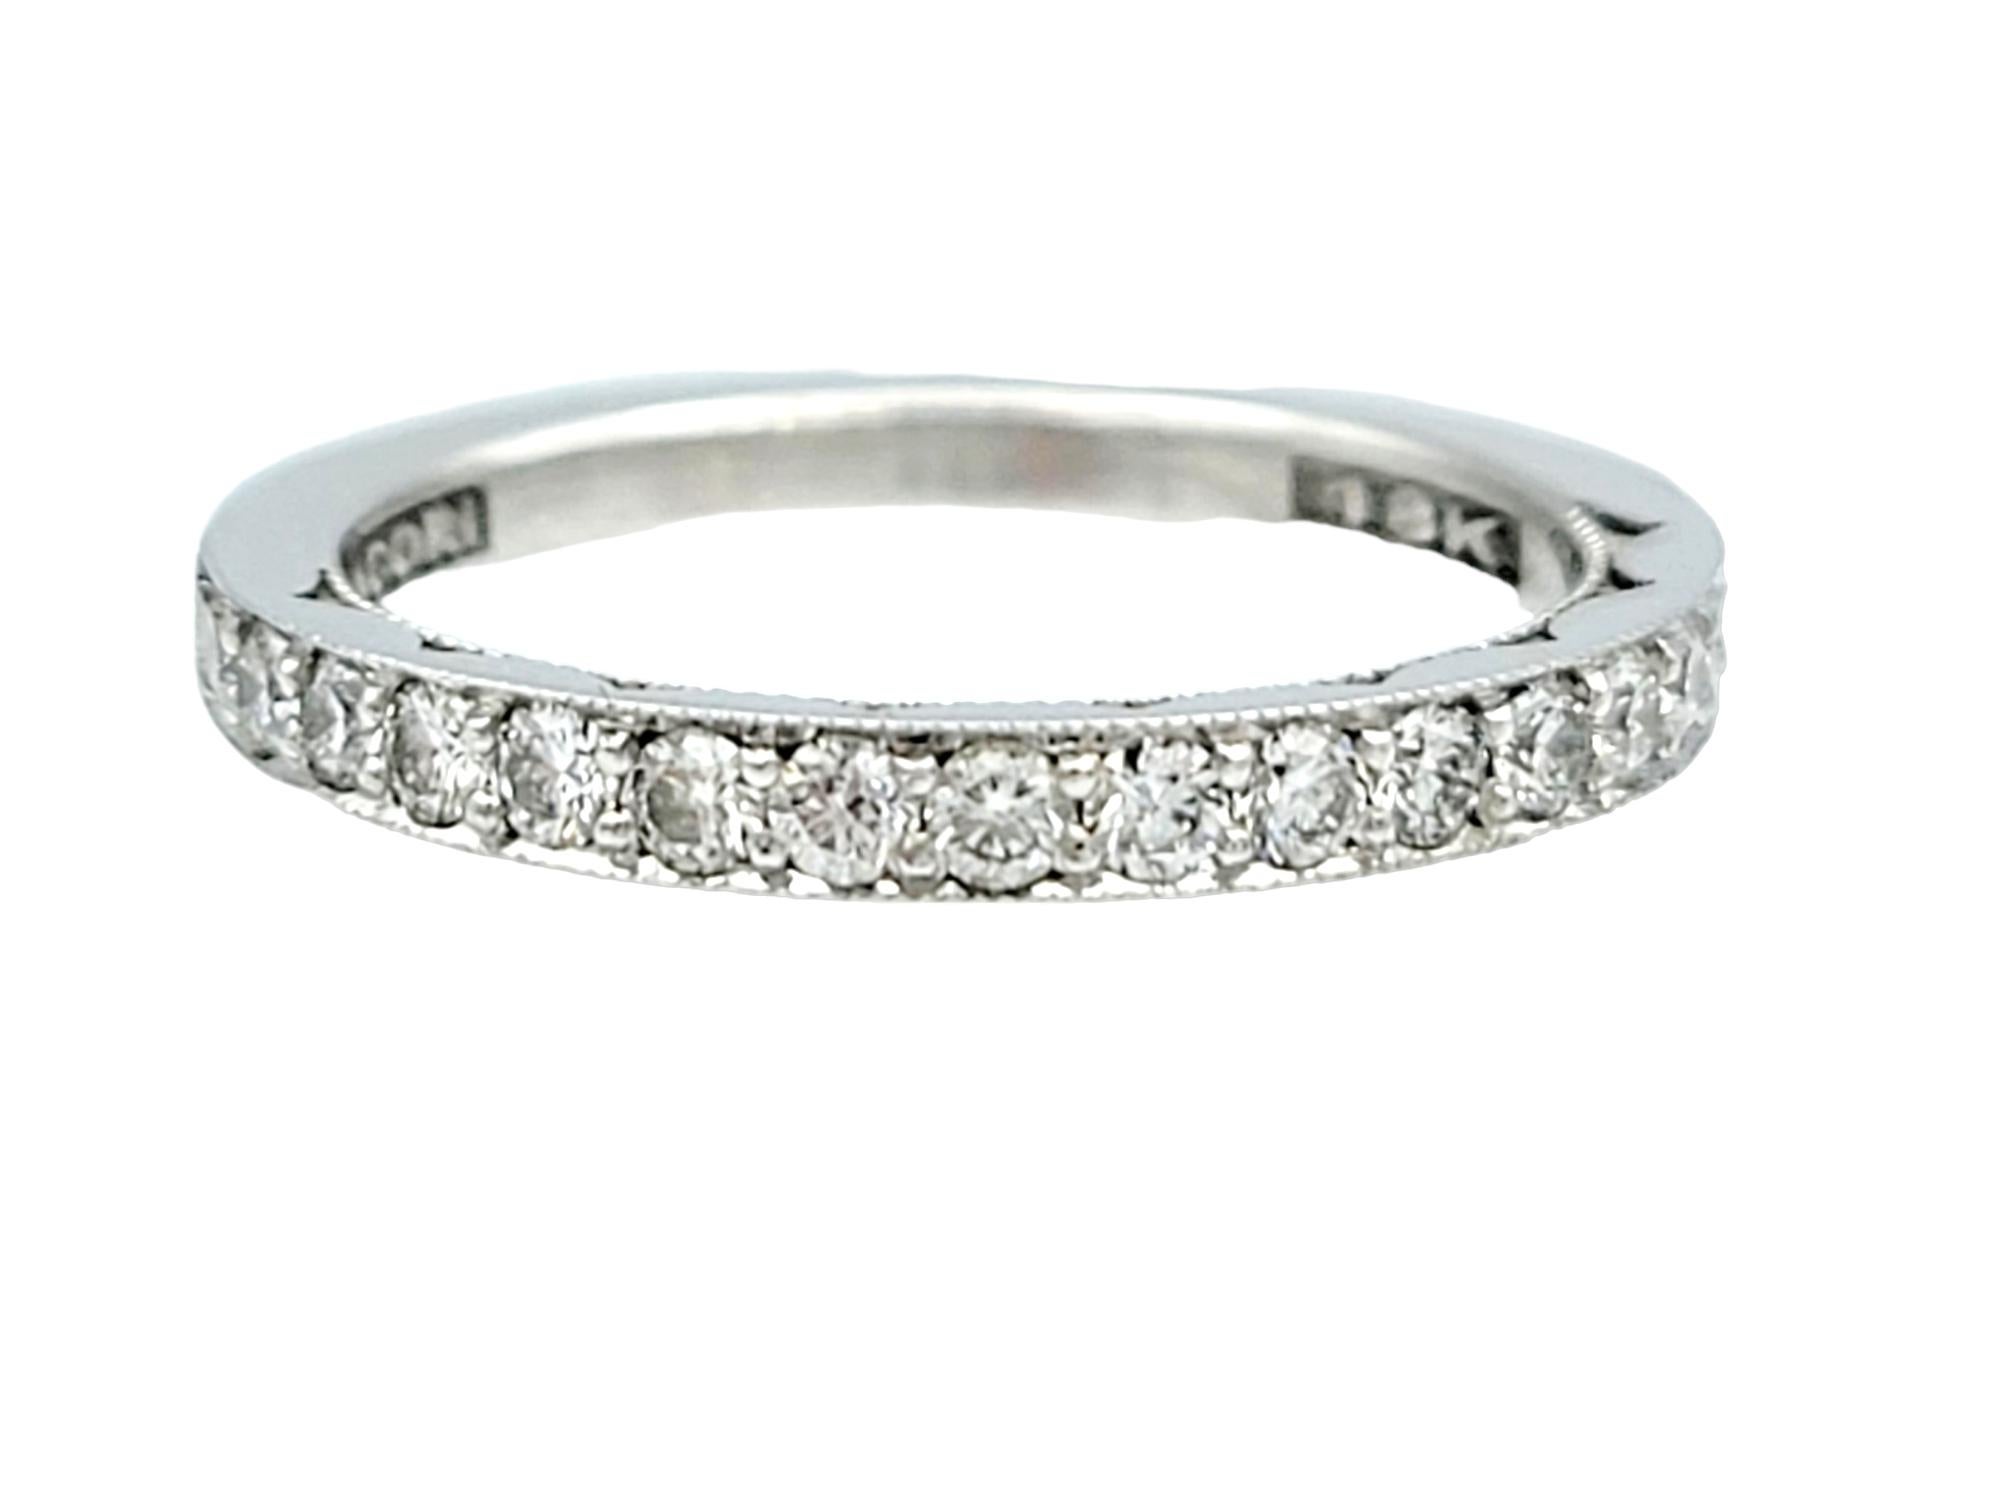 Contemporary Tacori Sculpted Crescent Pavé Diamond Wedding Band Ring in 18 Karat White Gold For Sale